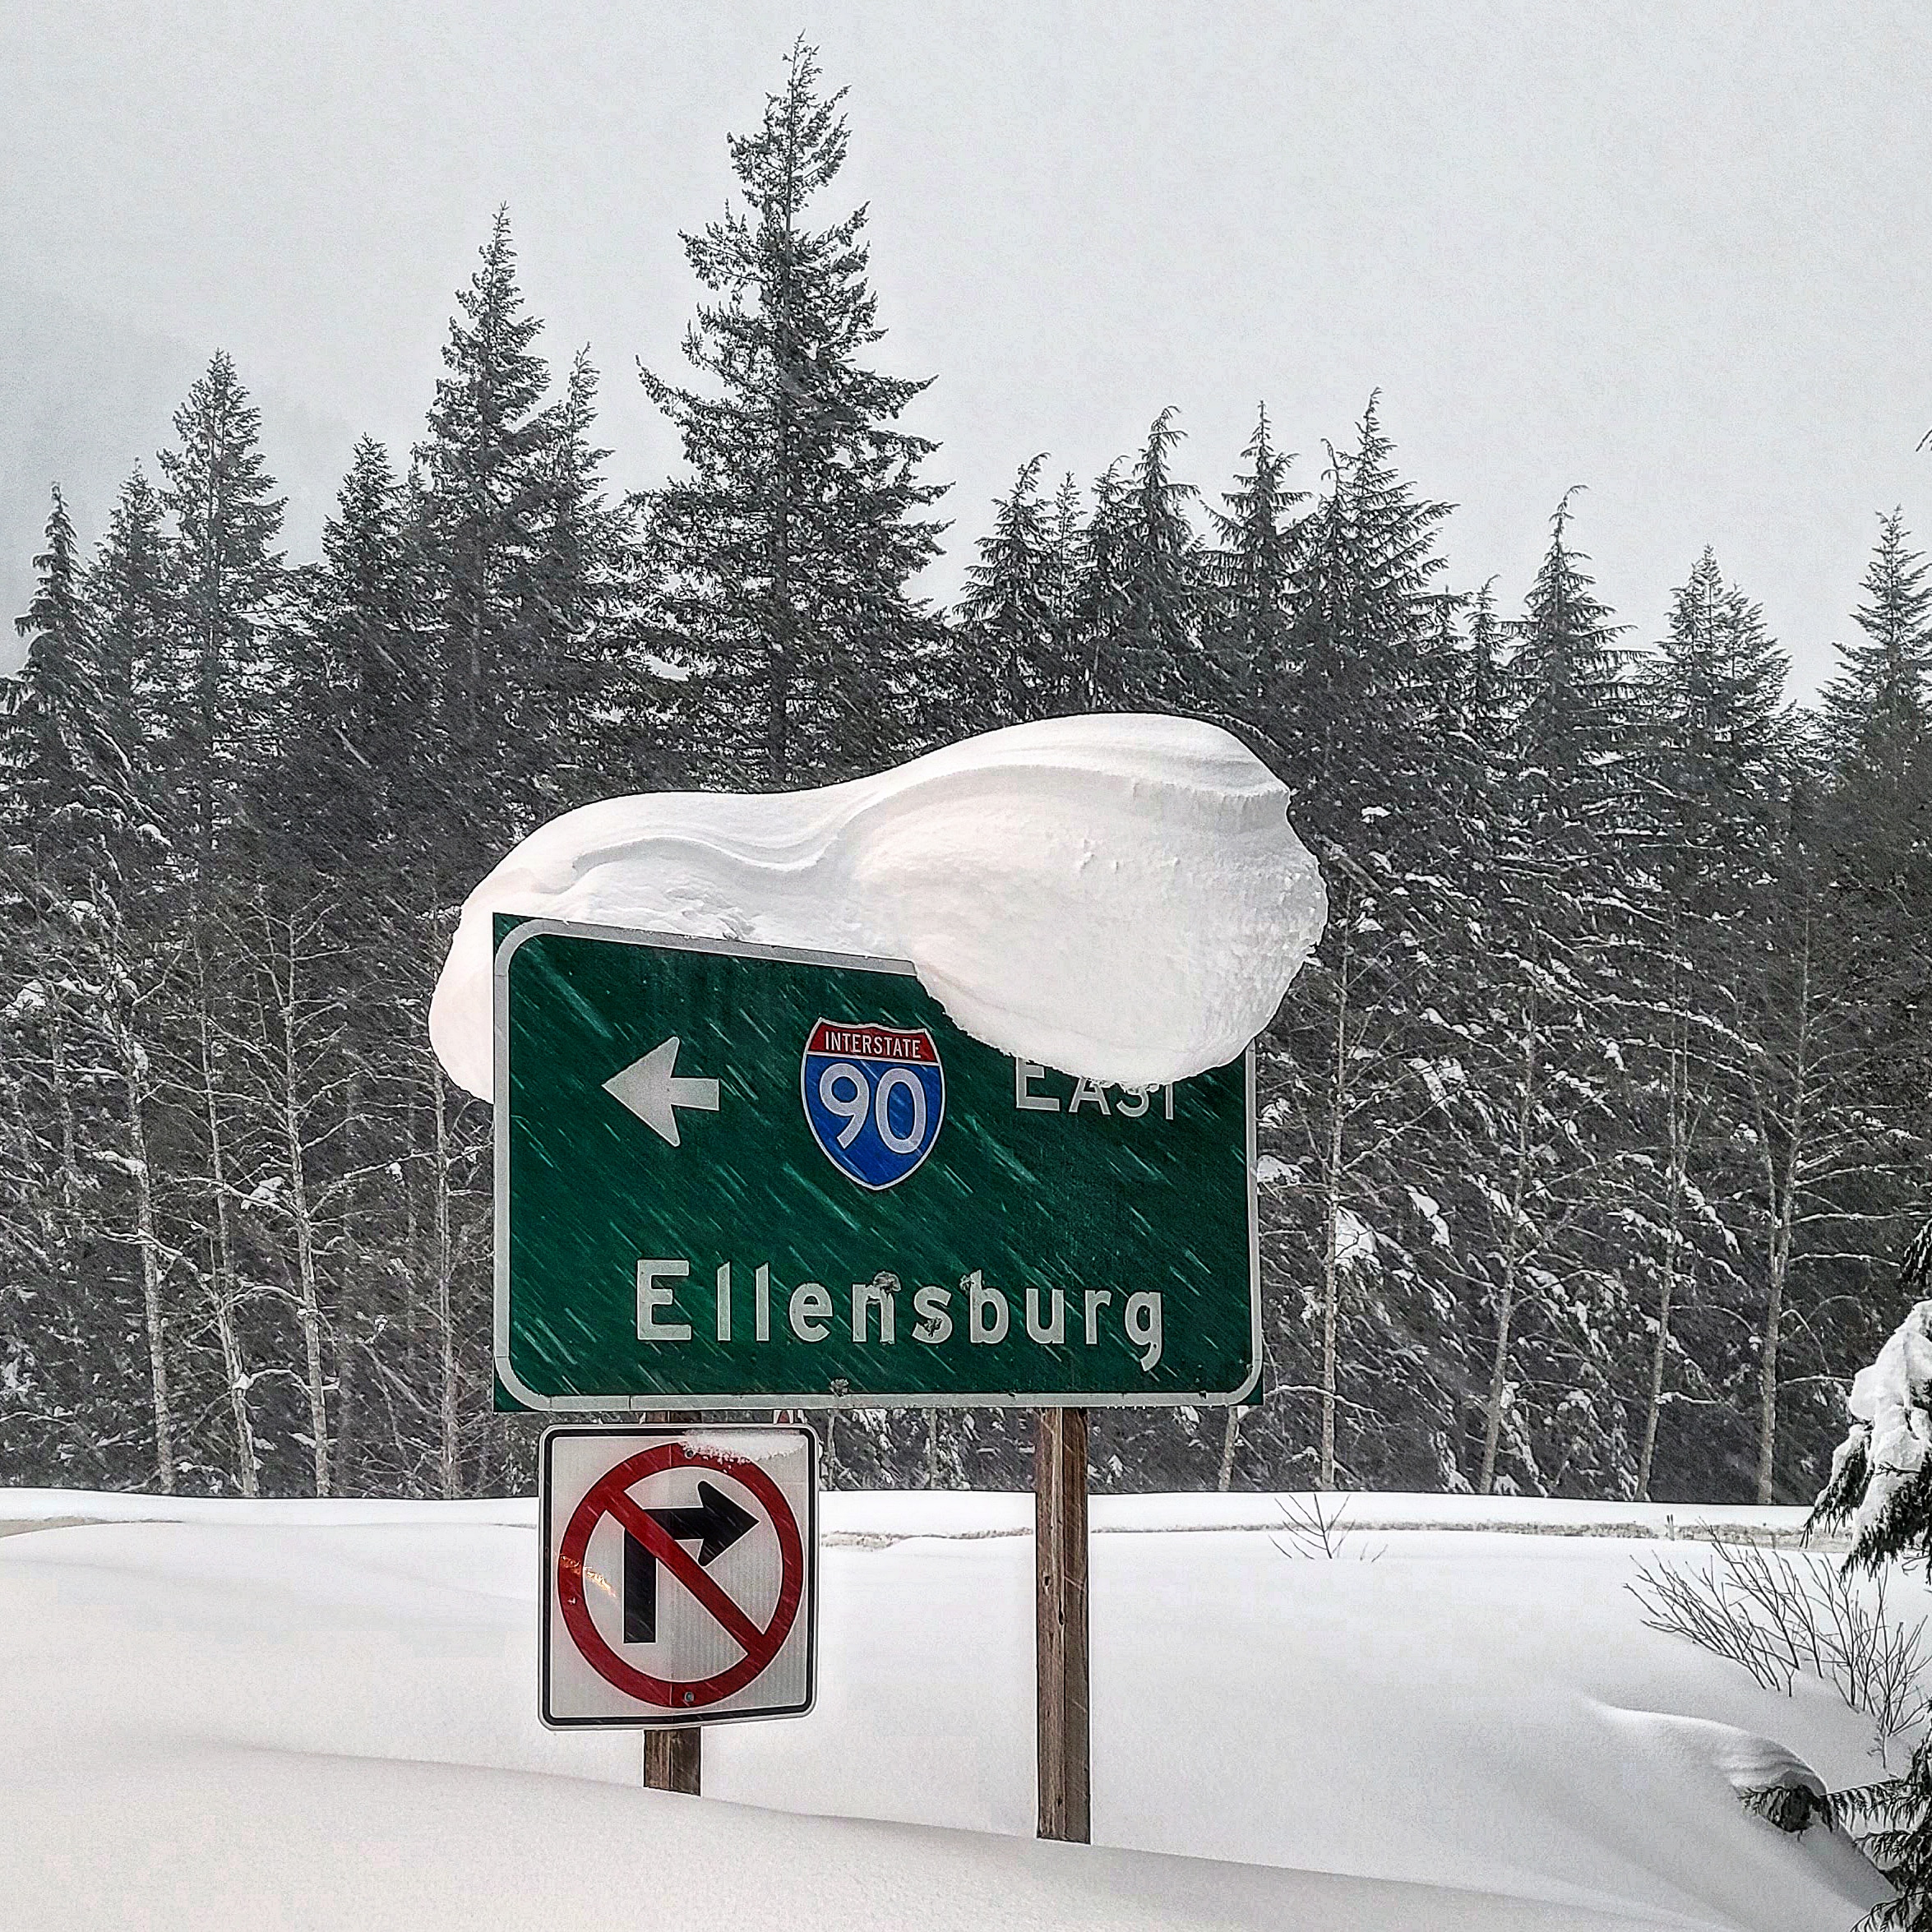 Large amount of snow accumulate on highway signs along I-90 Snoqualmie Pass.